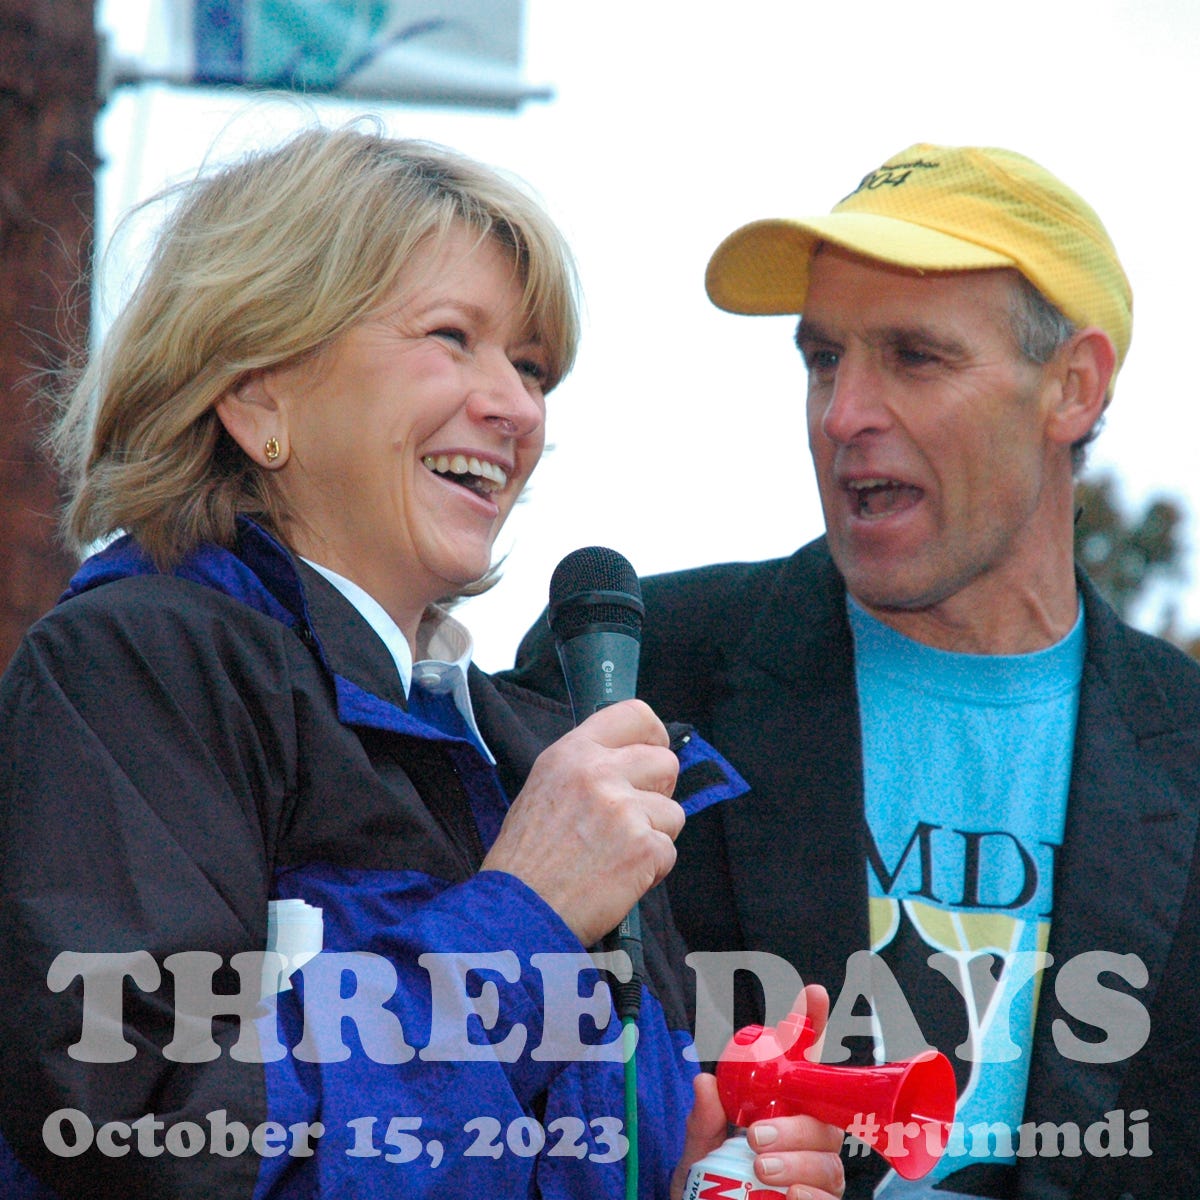 May be an image of 2 people, people smiling, people standing and text that says 'MD THREEDAYS October 15, 2023 runmdi'